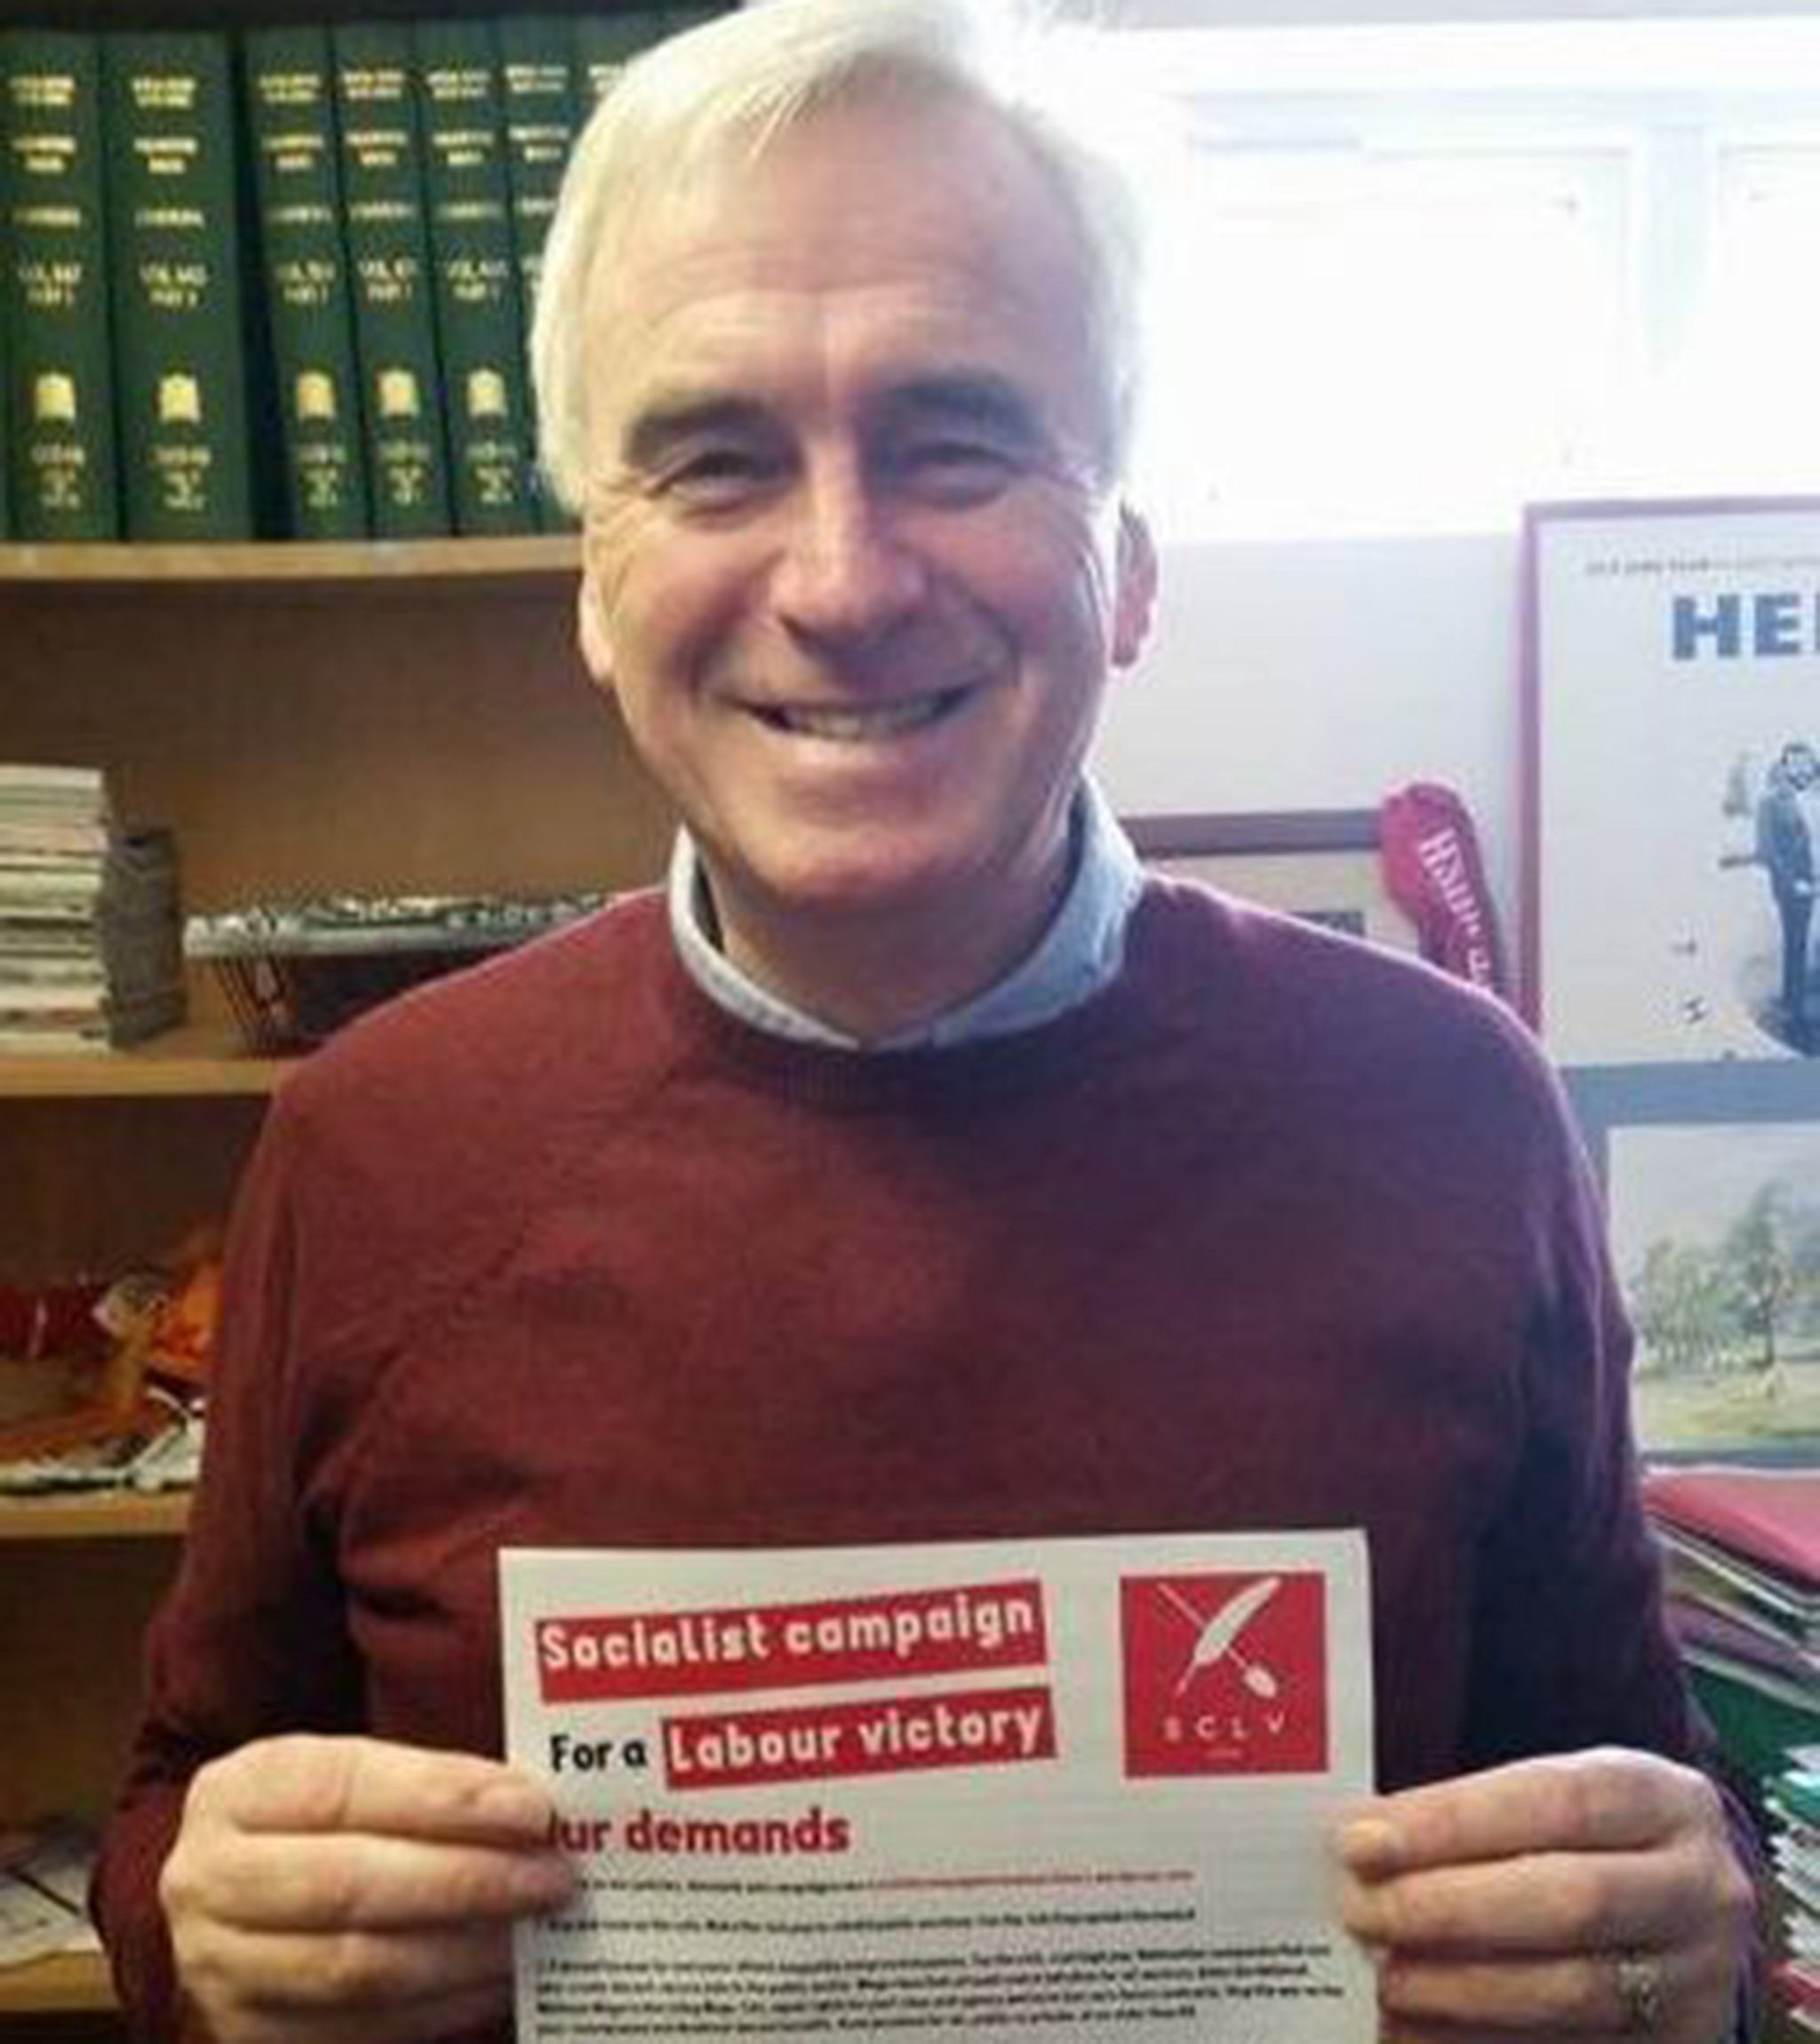 John McDonnell pictured with the leaflet